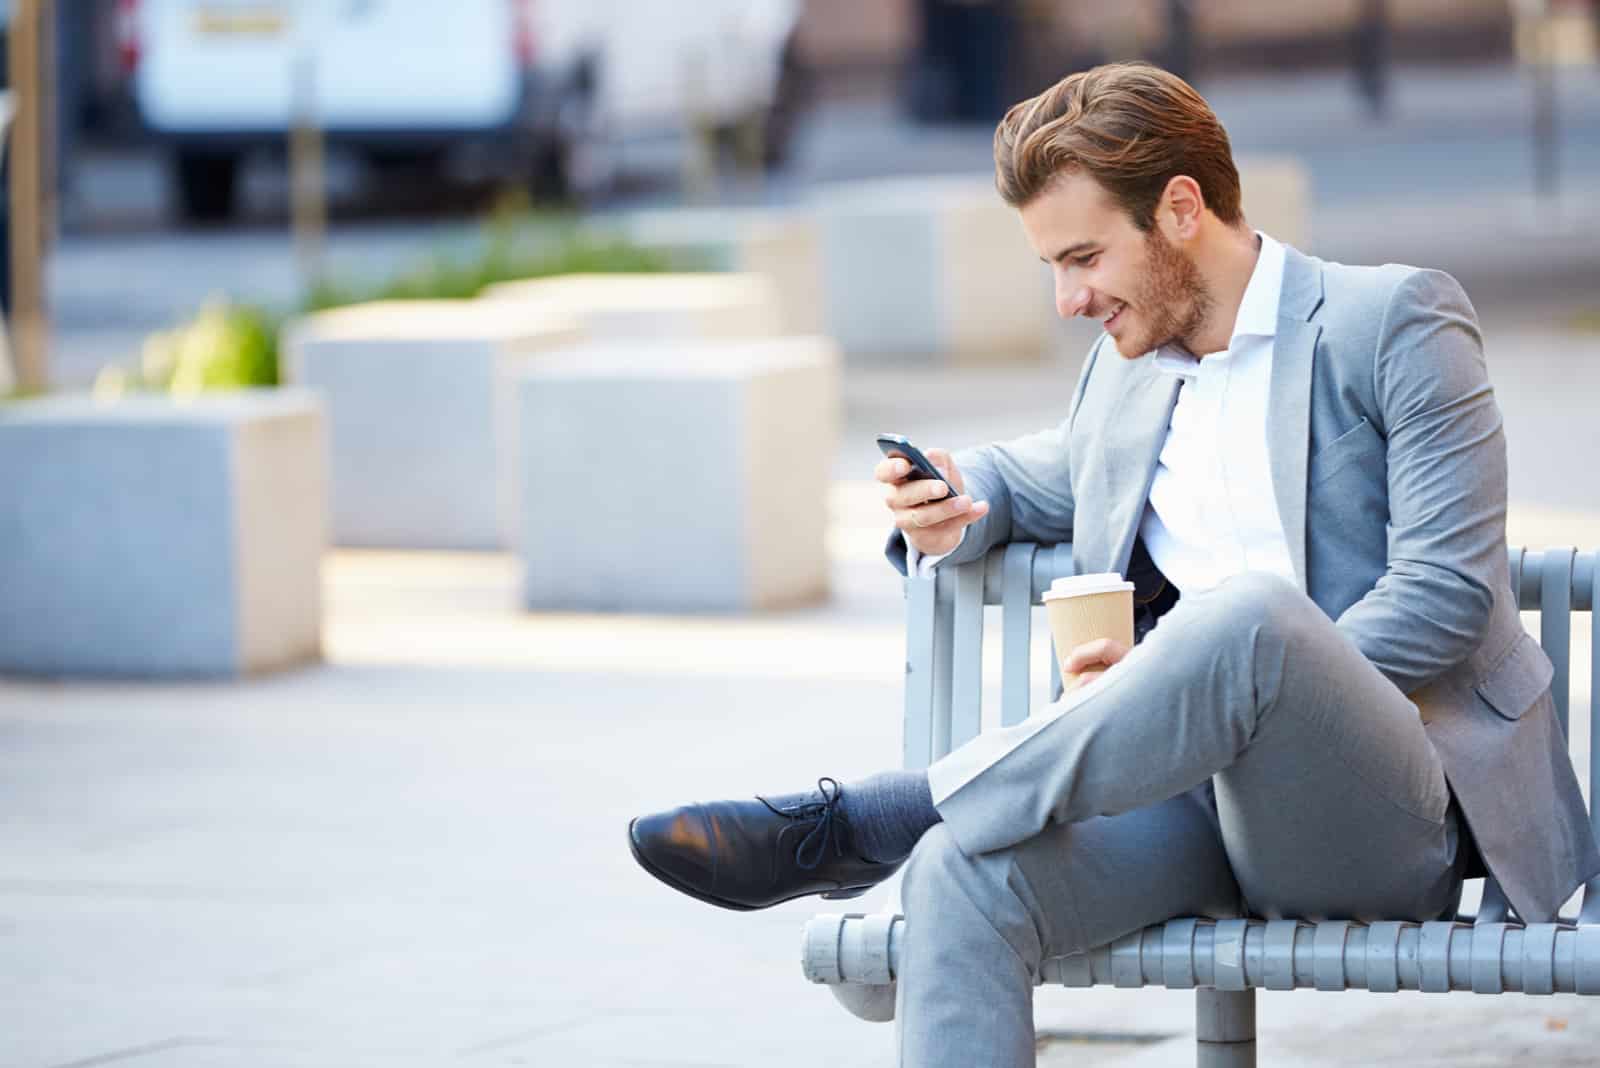 a man sits on a bench and a button on the phone